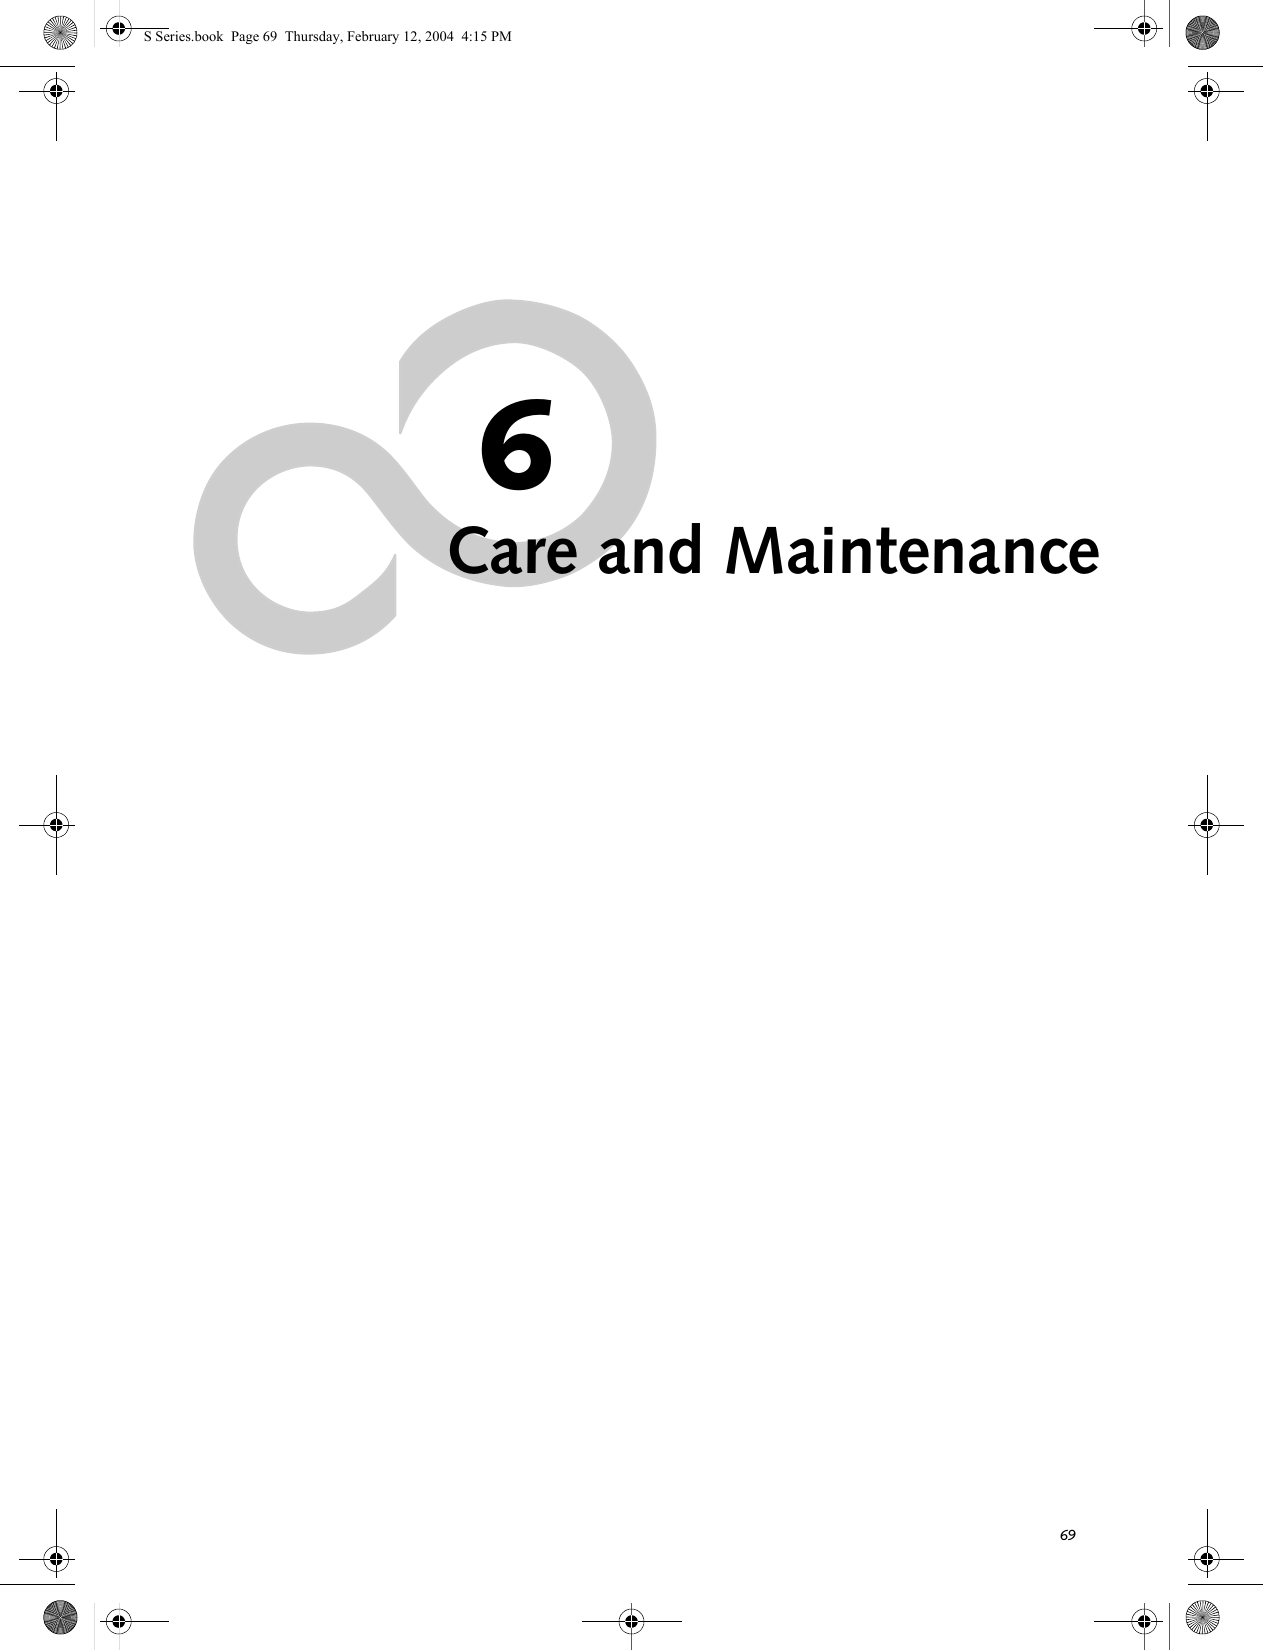 696Care and MaintenanceS Series.book  Page 69  Thursday, February 12, 2004  4:15 PM